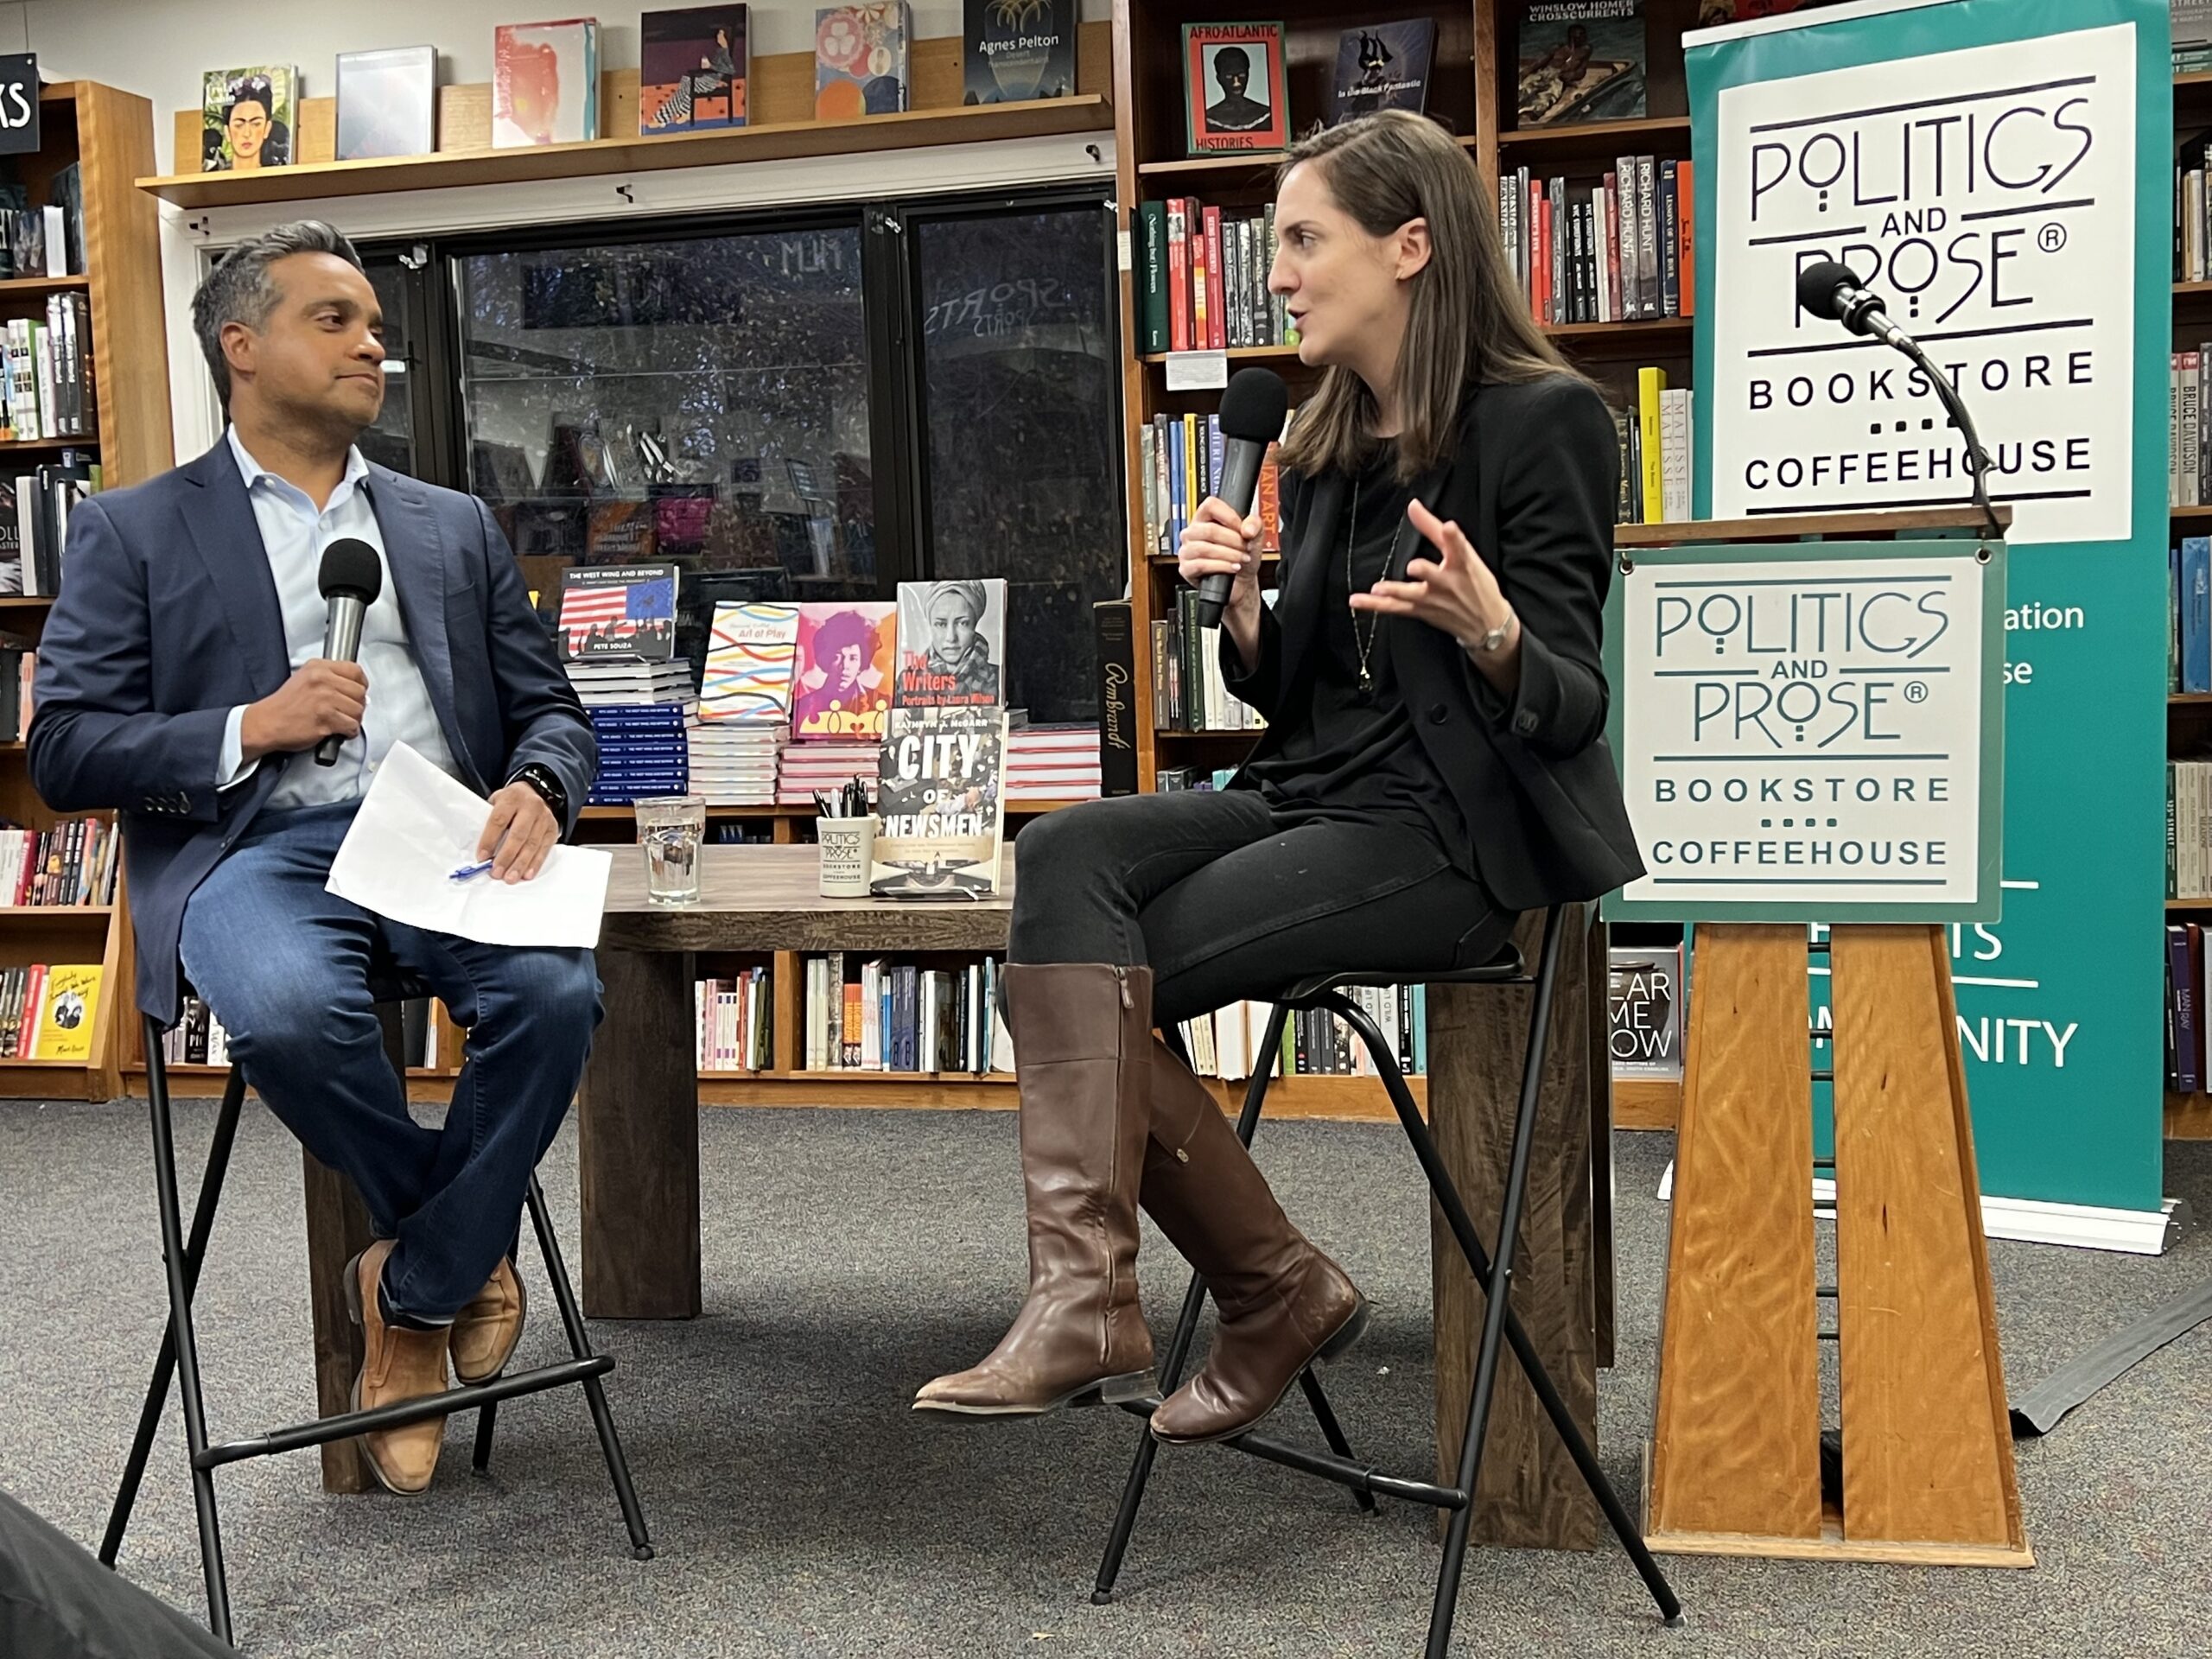 SJMC professor Kathryn McGarr speaks with UW alum and CNN correspondent Manu Raju about her new book, “City of Newsmen: Public Lies and Professional Secrets in Cold War Washington,” at a launch event held at Politics and Prose Bookstore in Washington, D.C. on Sunday, November 13.